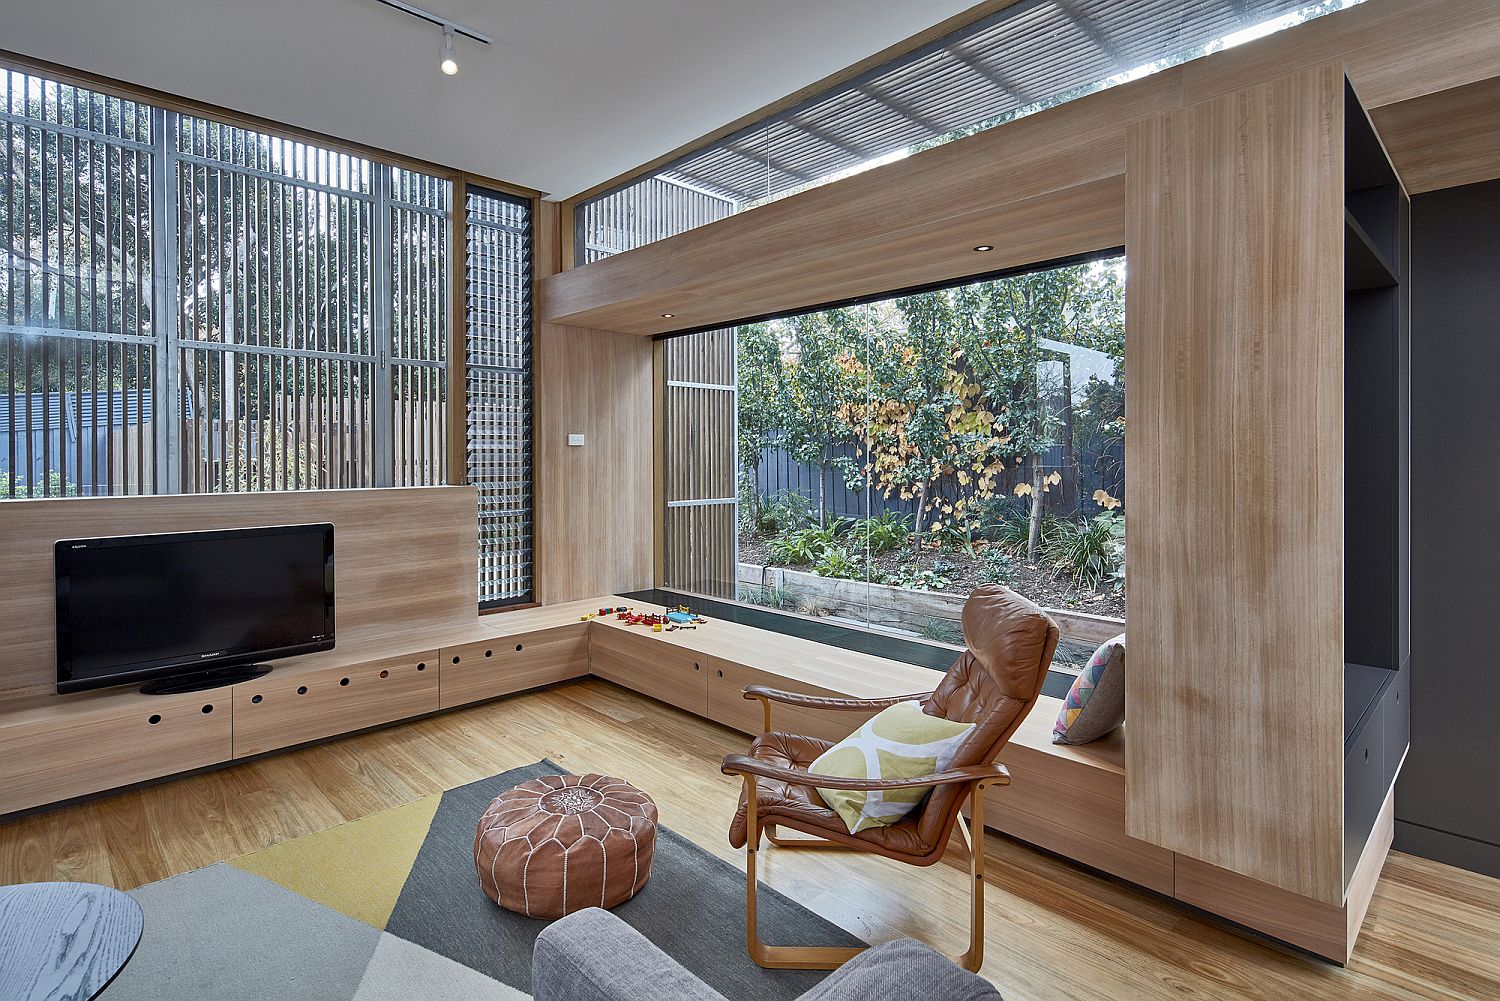 Gorgeous custom wooden furniture inside the Screen House